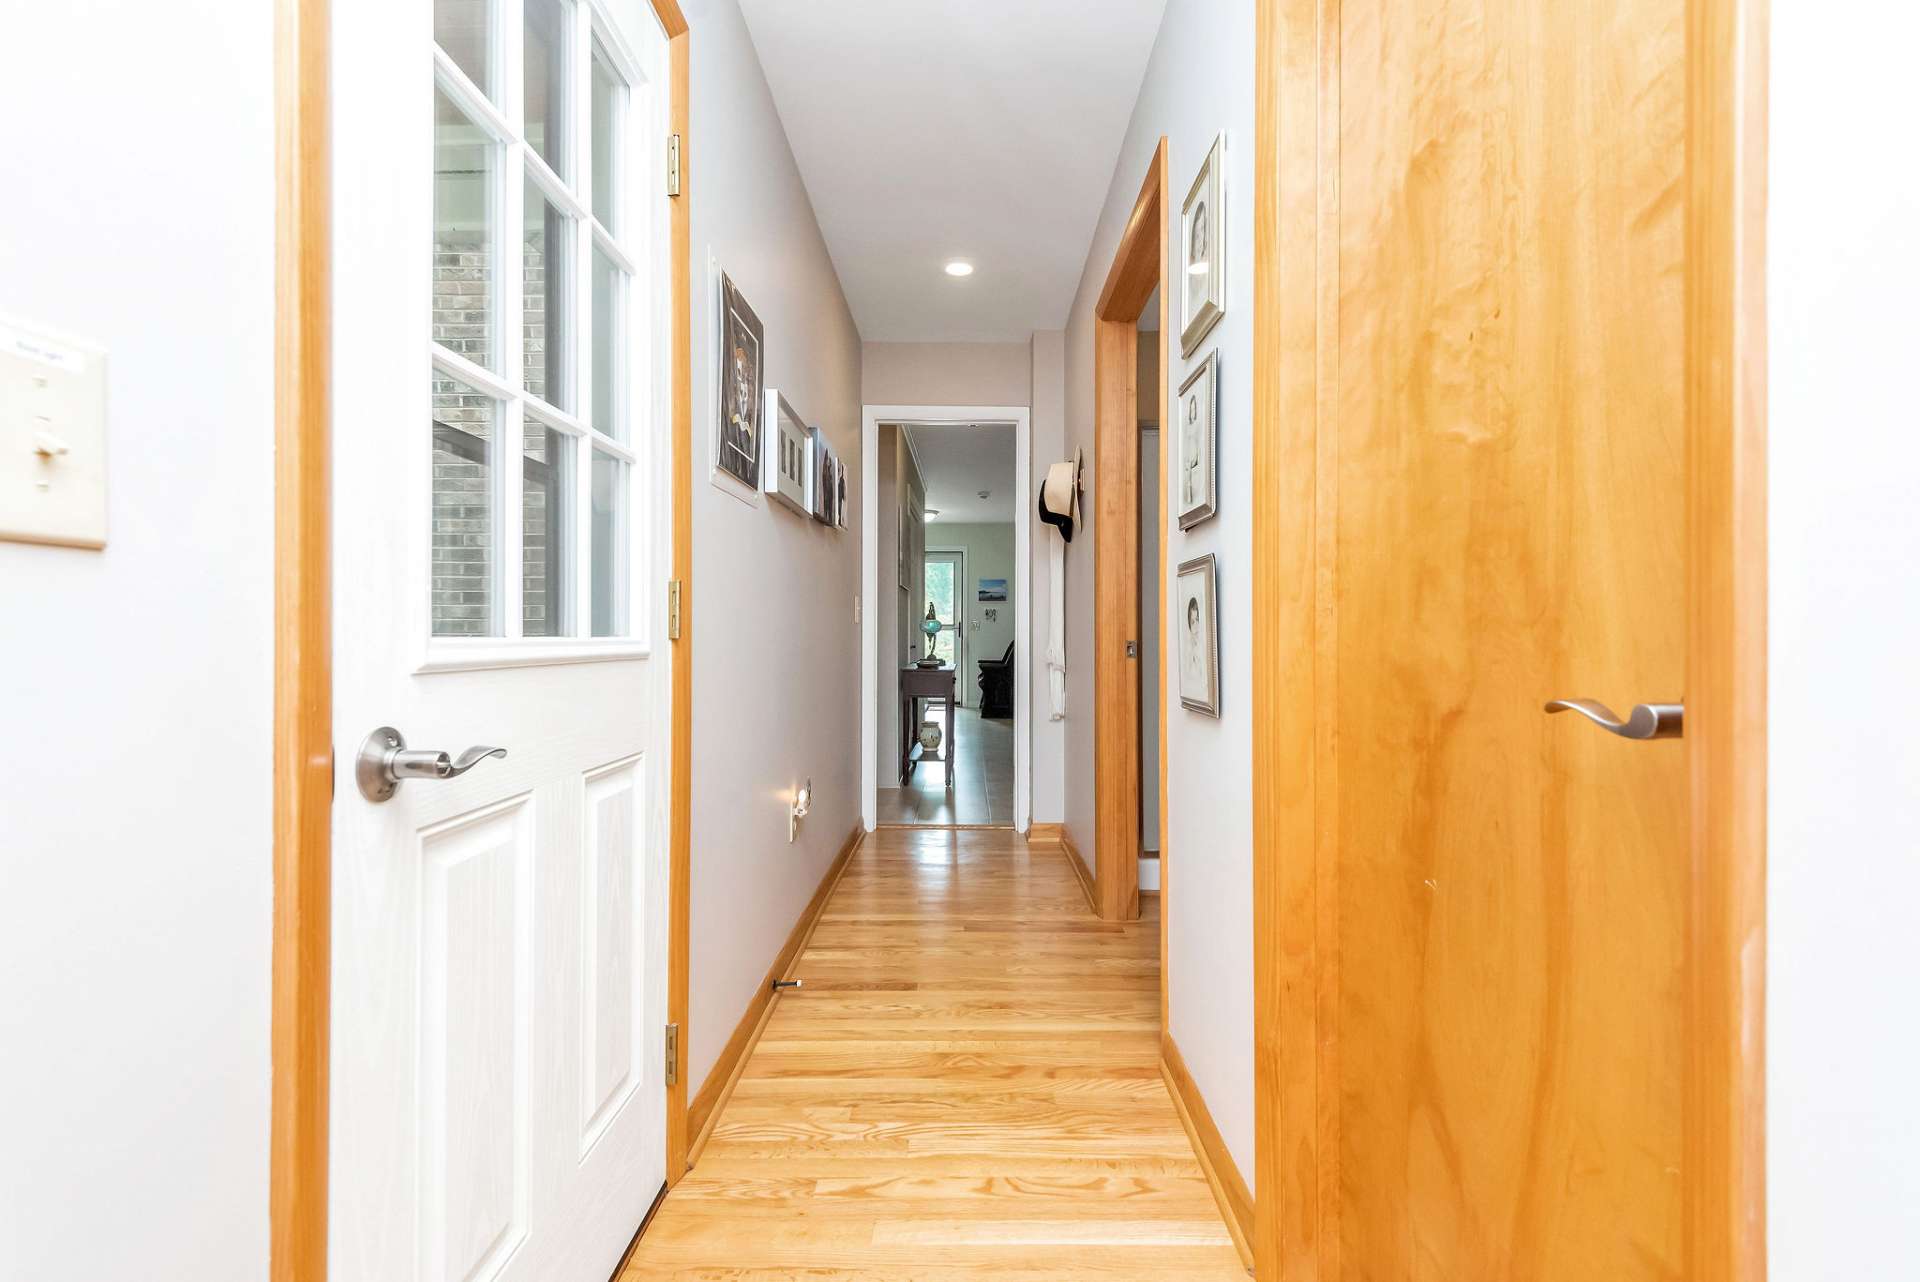 Back inside, this hallway leads from the living area to the second large storage closet, and a full bath.